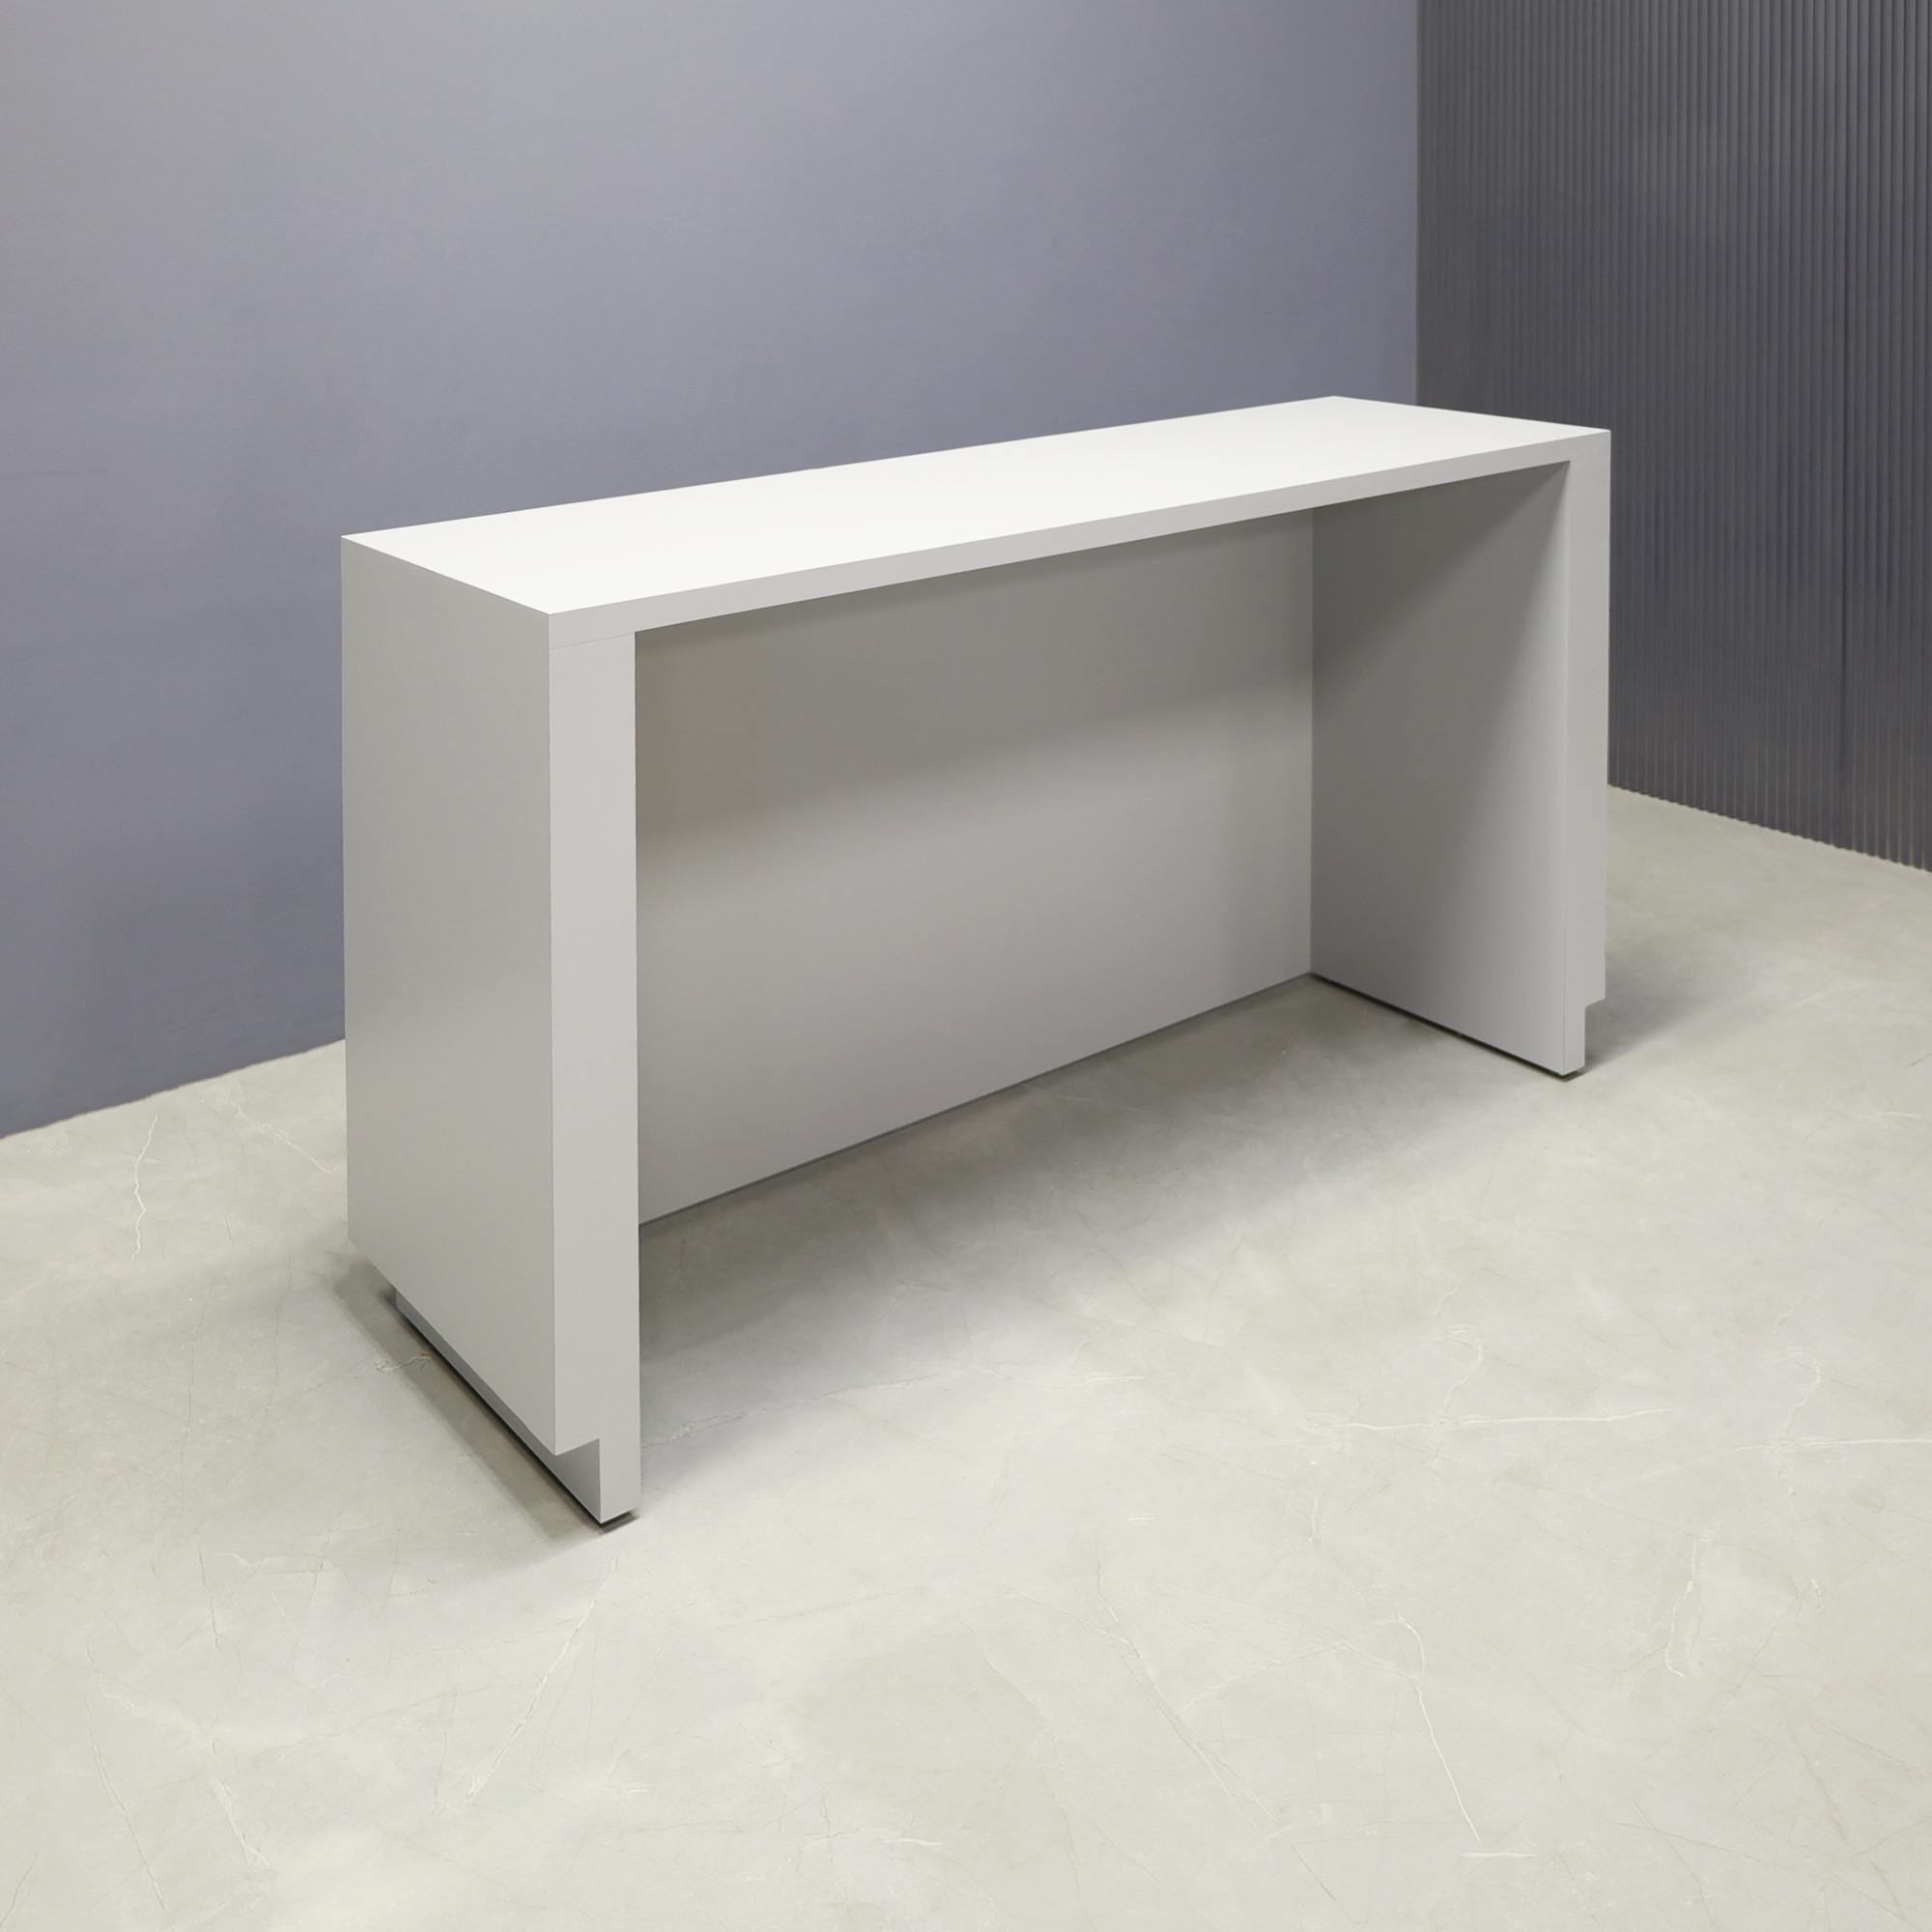 72-inch Houston Custom Reception Desk in folkstone gray matte laminate main desk and brushed aluminum toe-kick, with white LED, shown here.